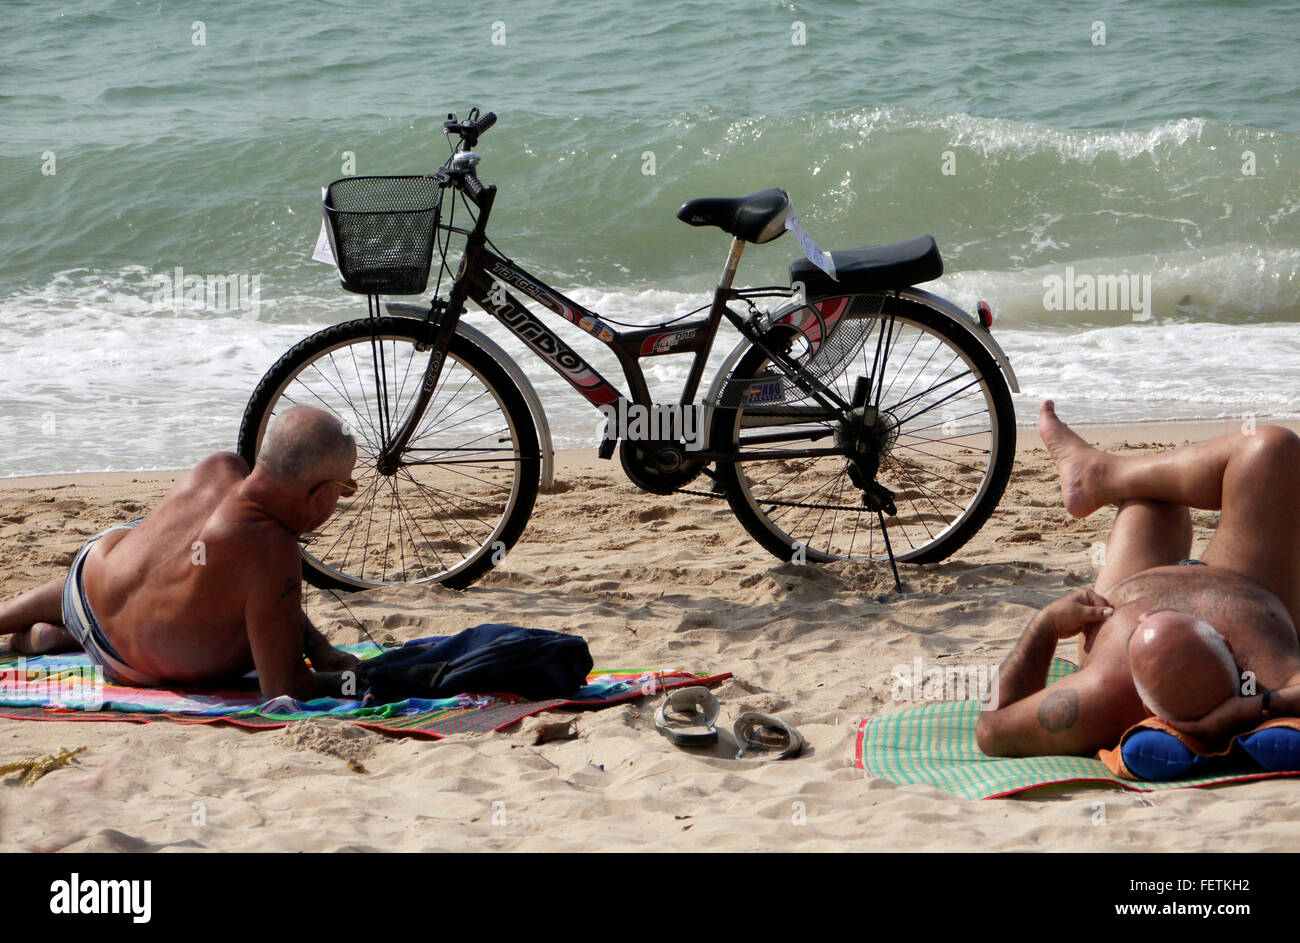 A Bicycle with a passenger pillion seat parked on the beach in Pattaya Thailand with two elderly males sunbathing and relaxing Stock Photo